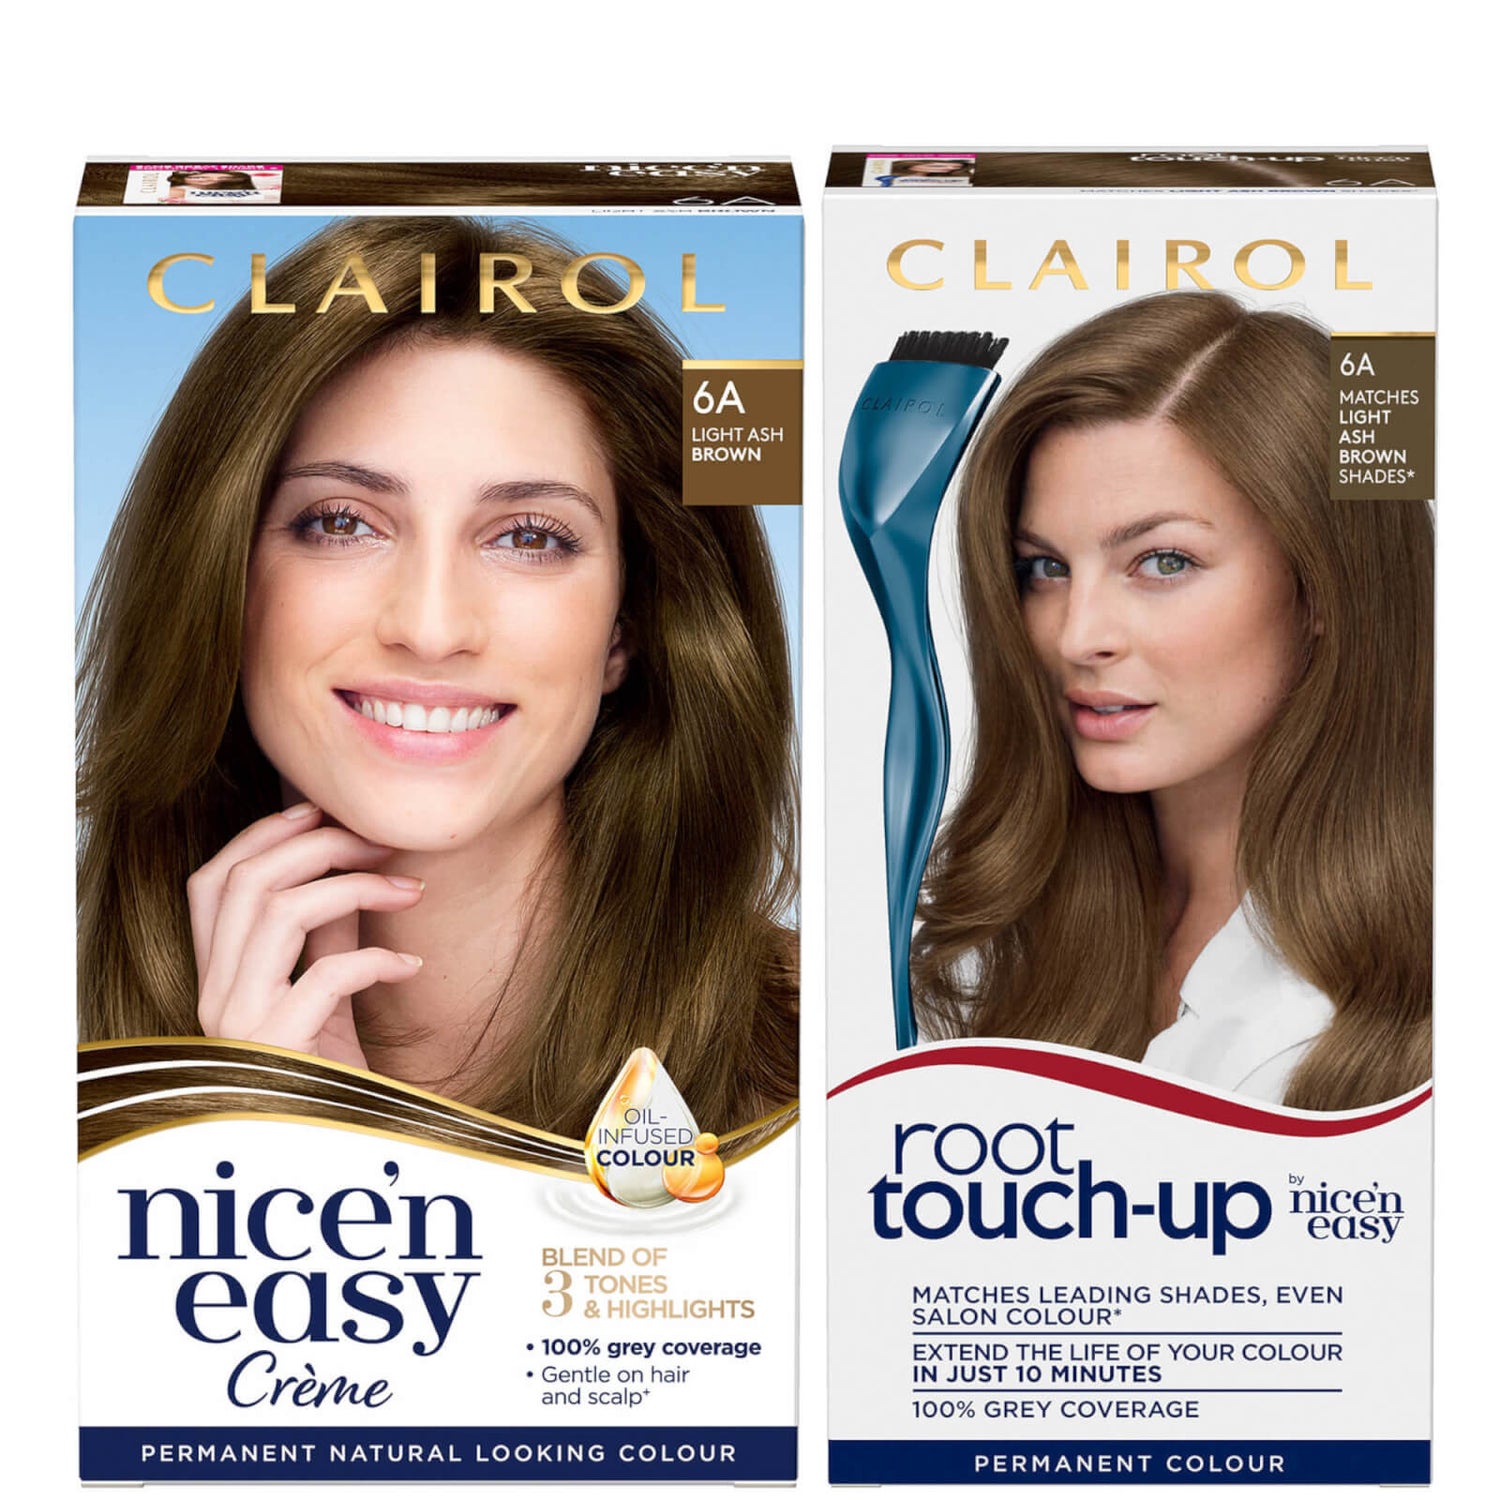 Clairol Root Touch-Up 6A Light Ash Brown x Nice'n Easy Permanent 6A Light Ash Brown Bundle